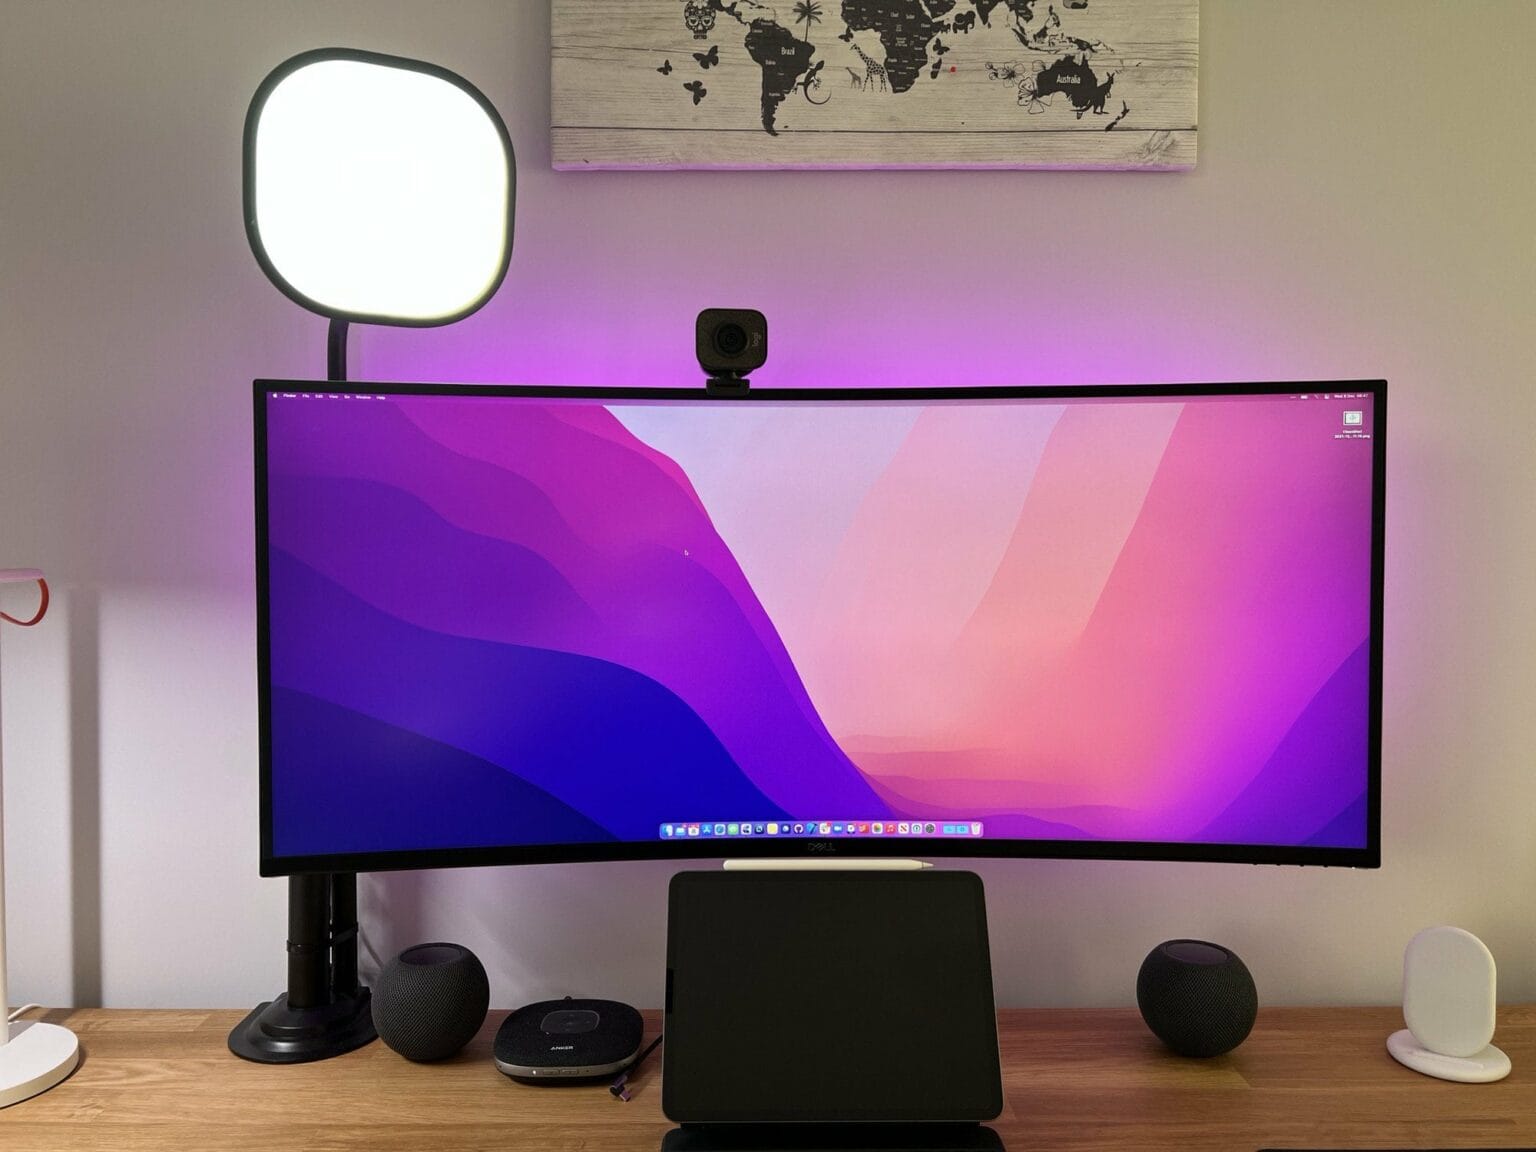 A key light can be a webcam's best friend. And did you know your HomePod minis need a subwoofer?